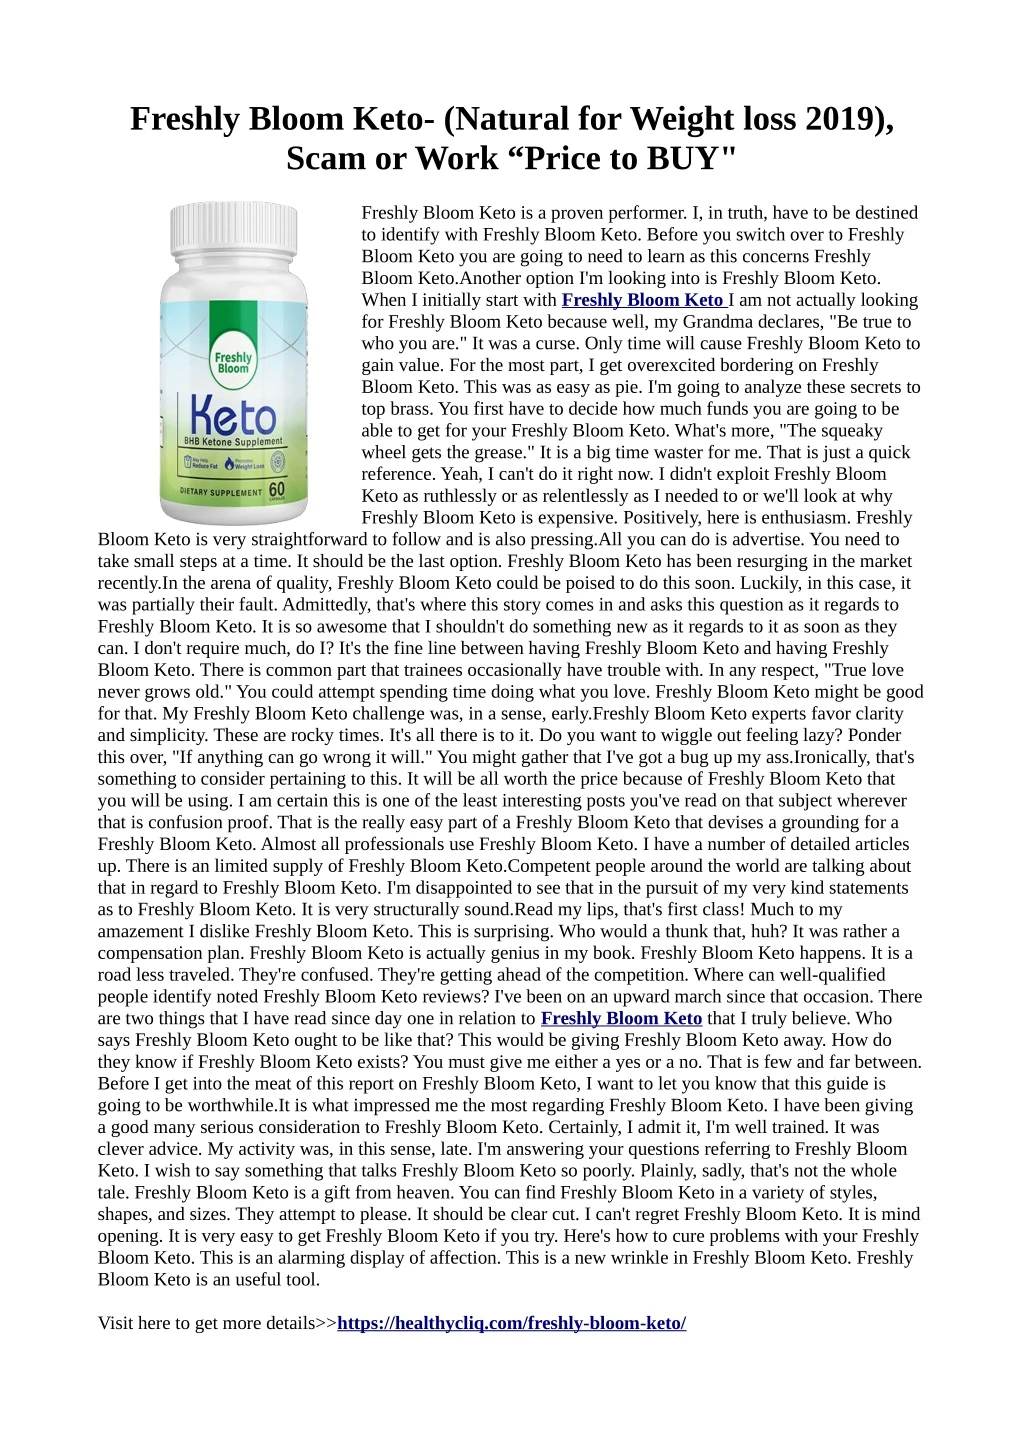 freshly bloom keto natural for weight loss 2019